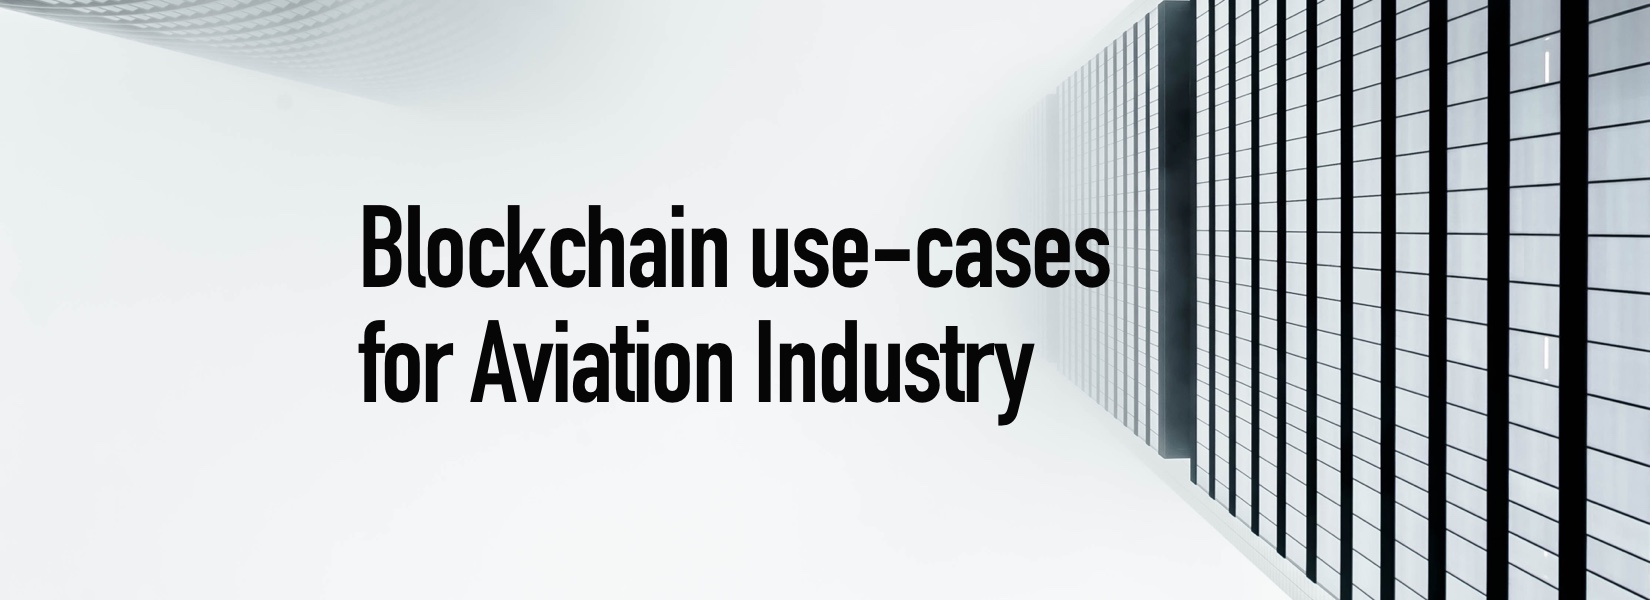 Blockchain use-cases for Aviation Industry in 2018